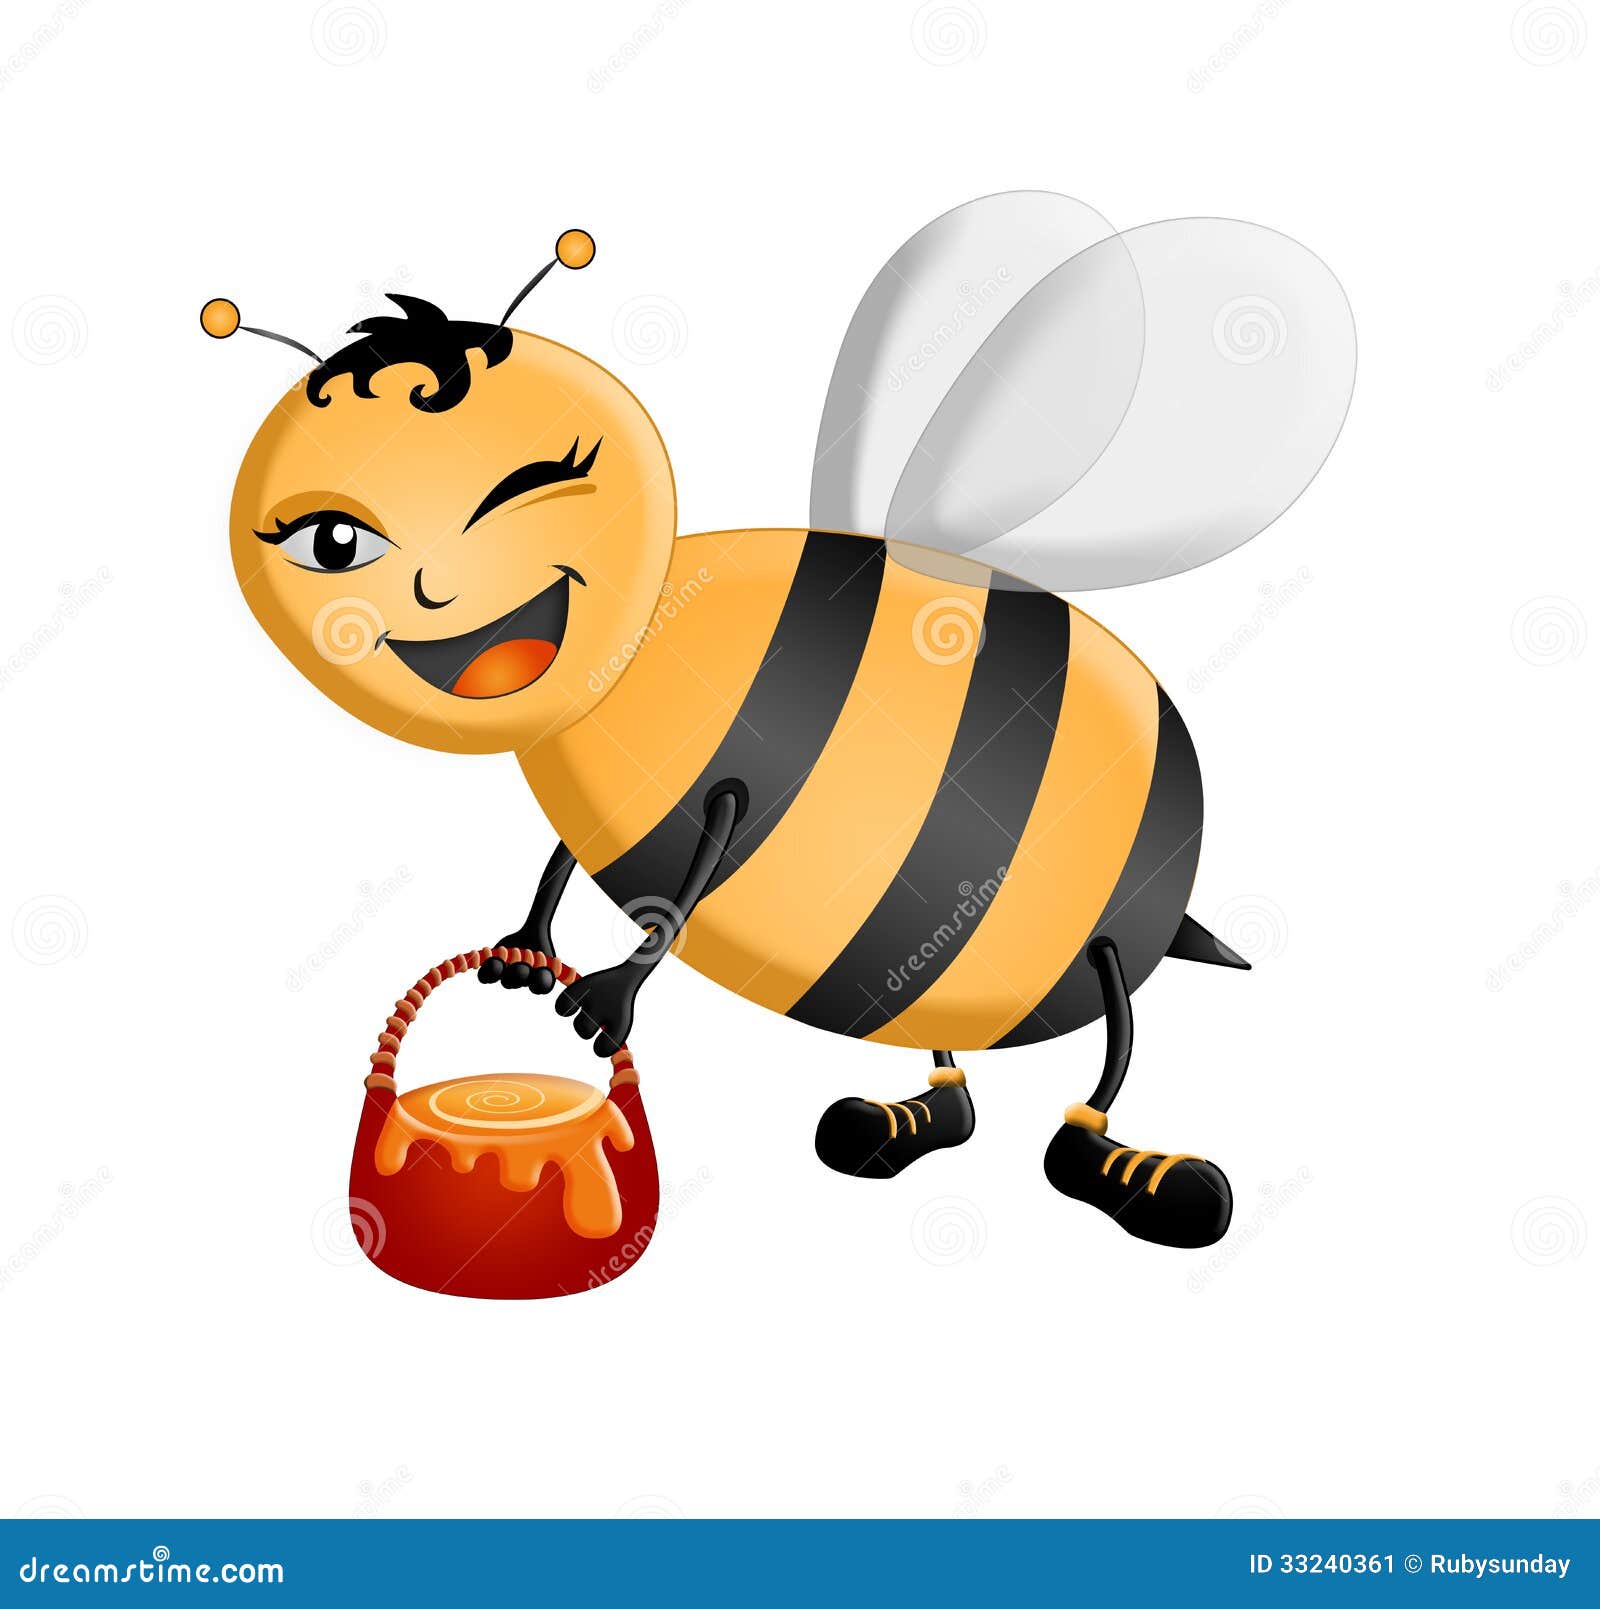 worker bee clipart - photo #48